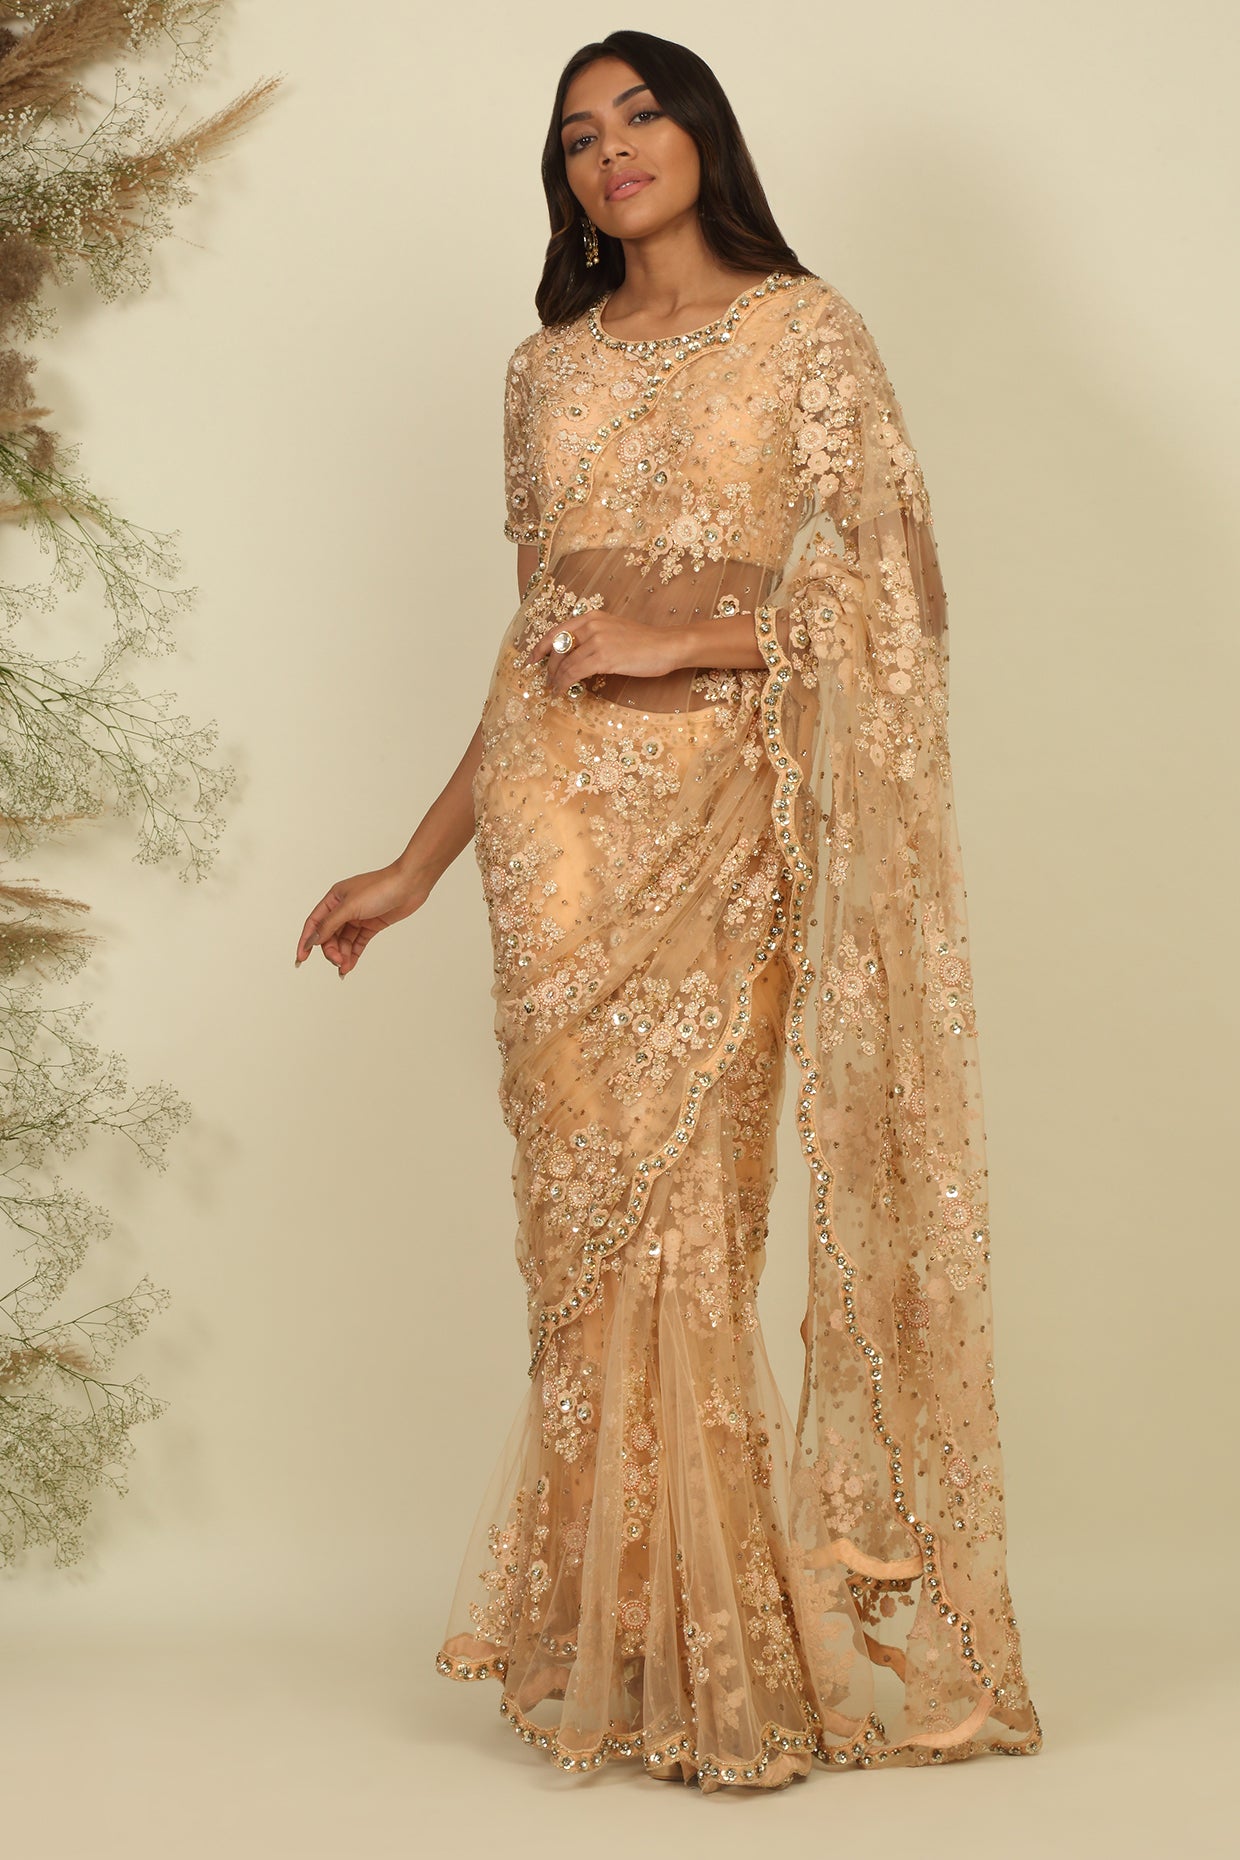 Enchanted Reverie Saree: The Dreamy Bridal Delight